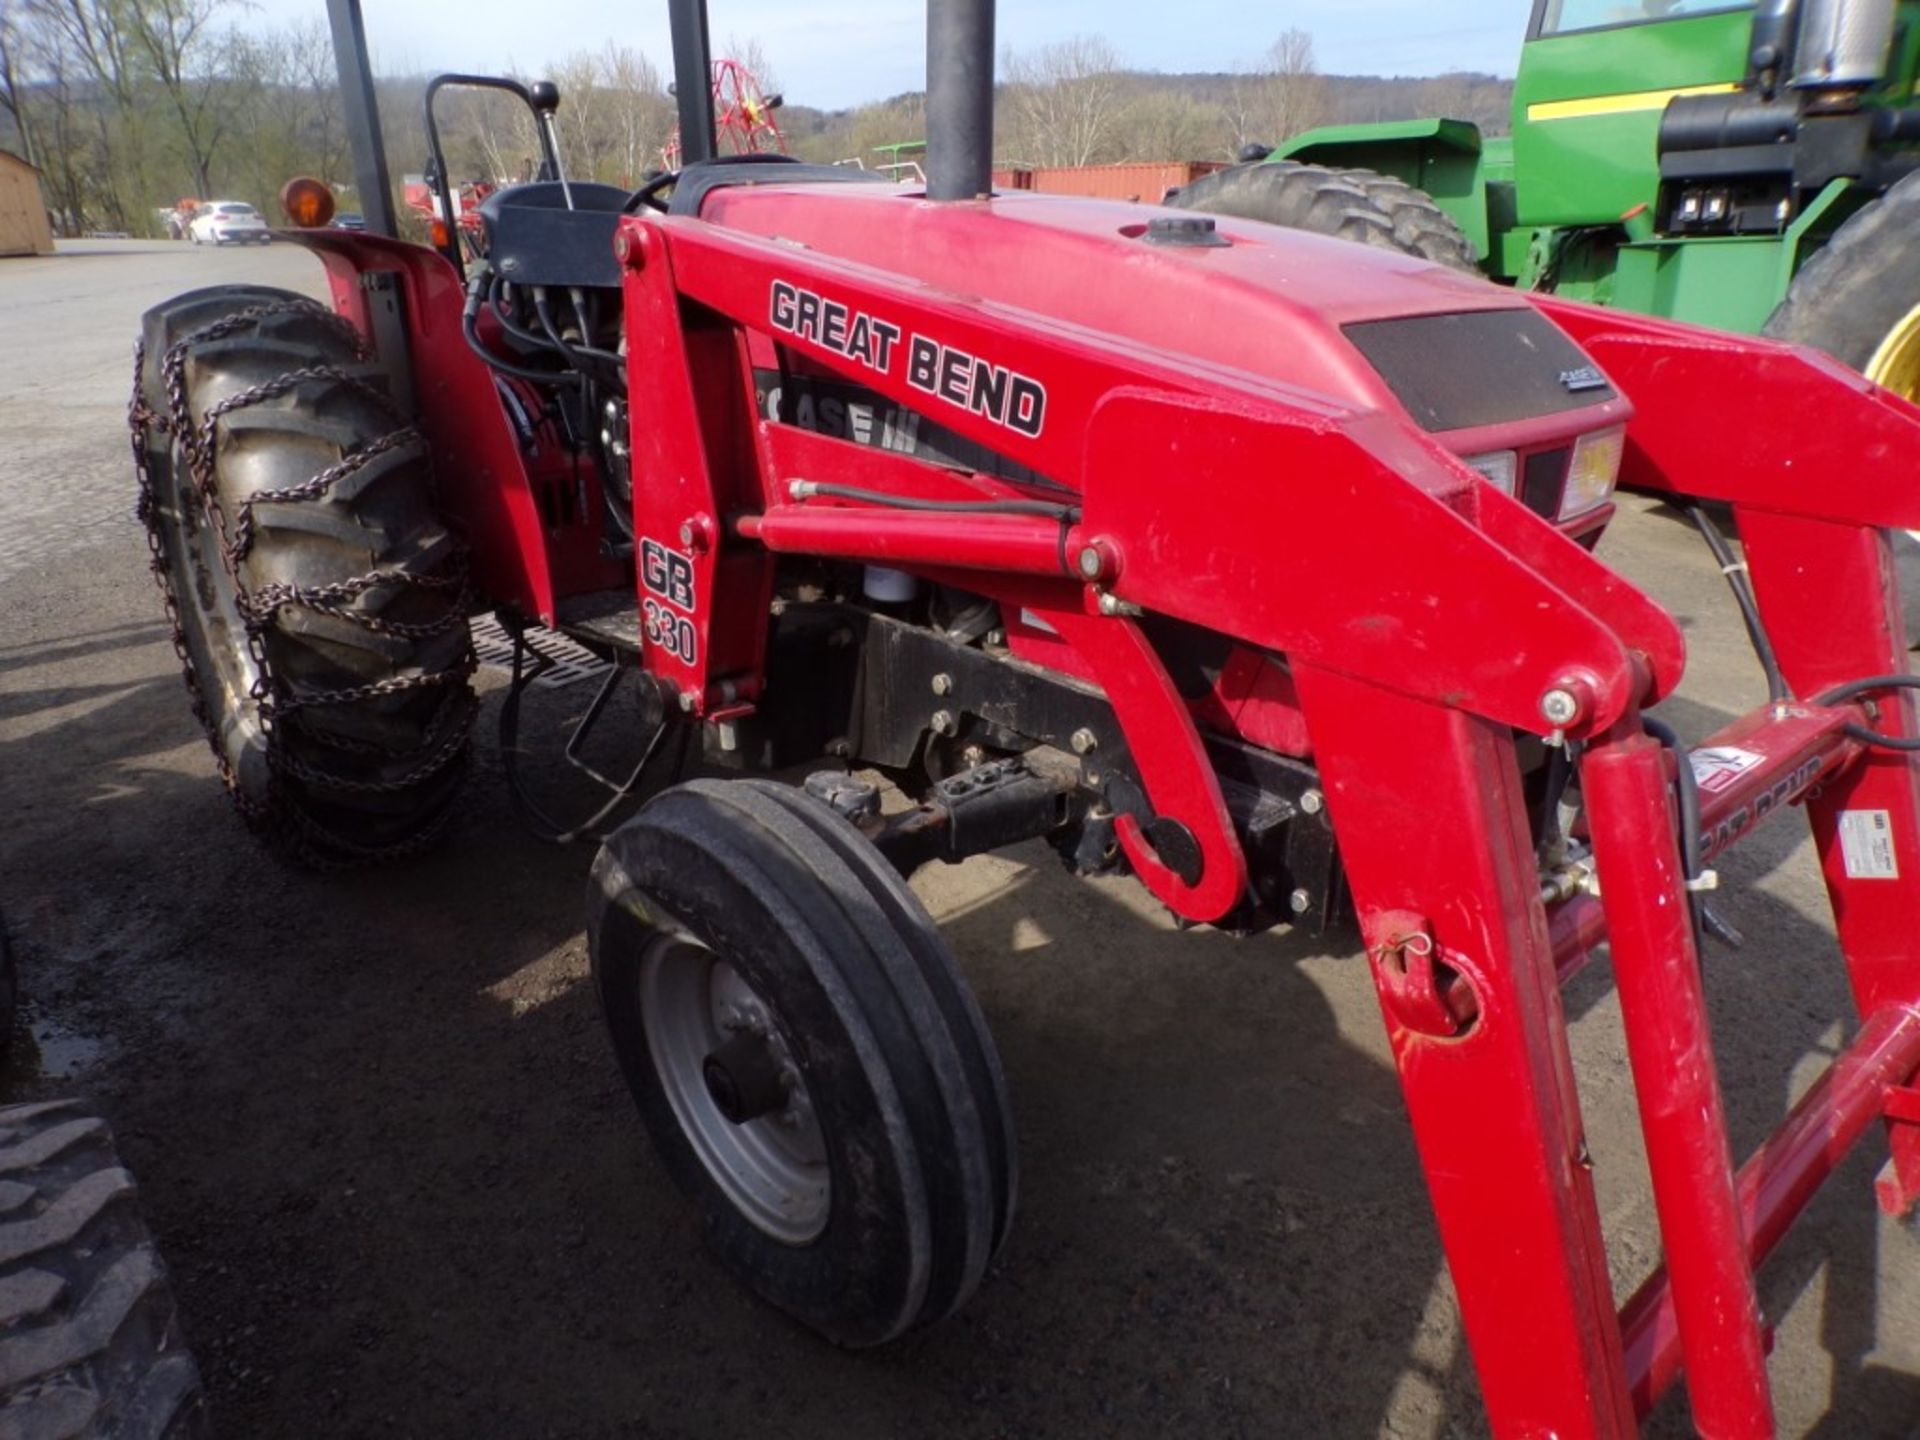 Case IH 3220 w/Great Bend 330 Loader, w/Chains, PTO, 3pt, ROPS, 343 Orig. Hours (5502) - Image 3 of 5